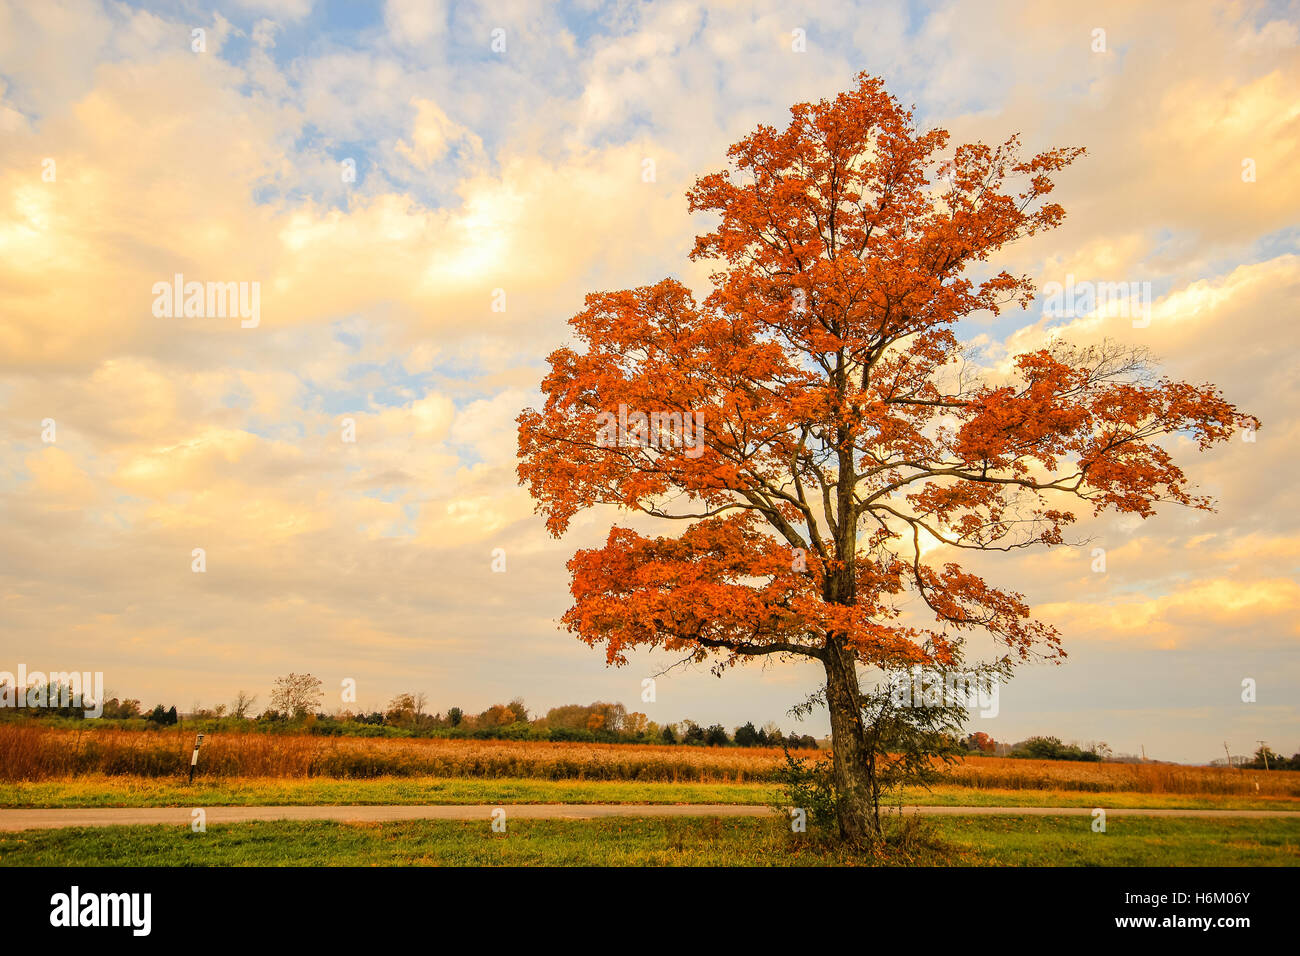 A single tree with vibrant leaves Stock Photo